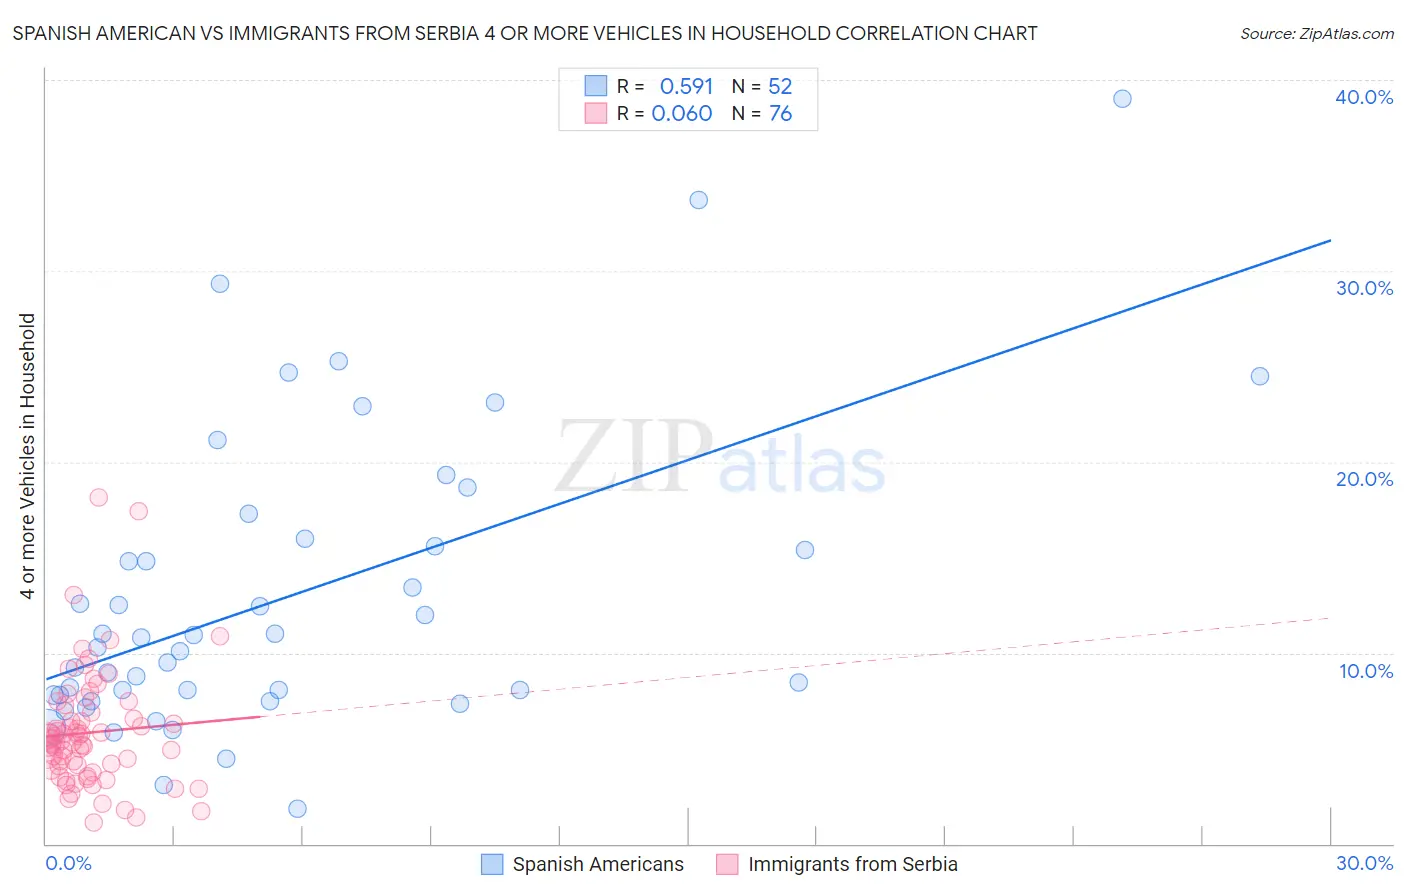 Spanish American vs Immigrants from Serbia 4 or more Vehicles in Household